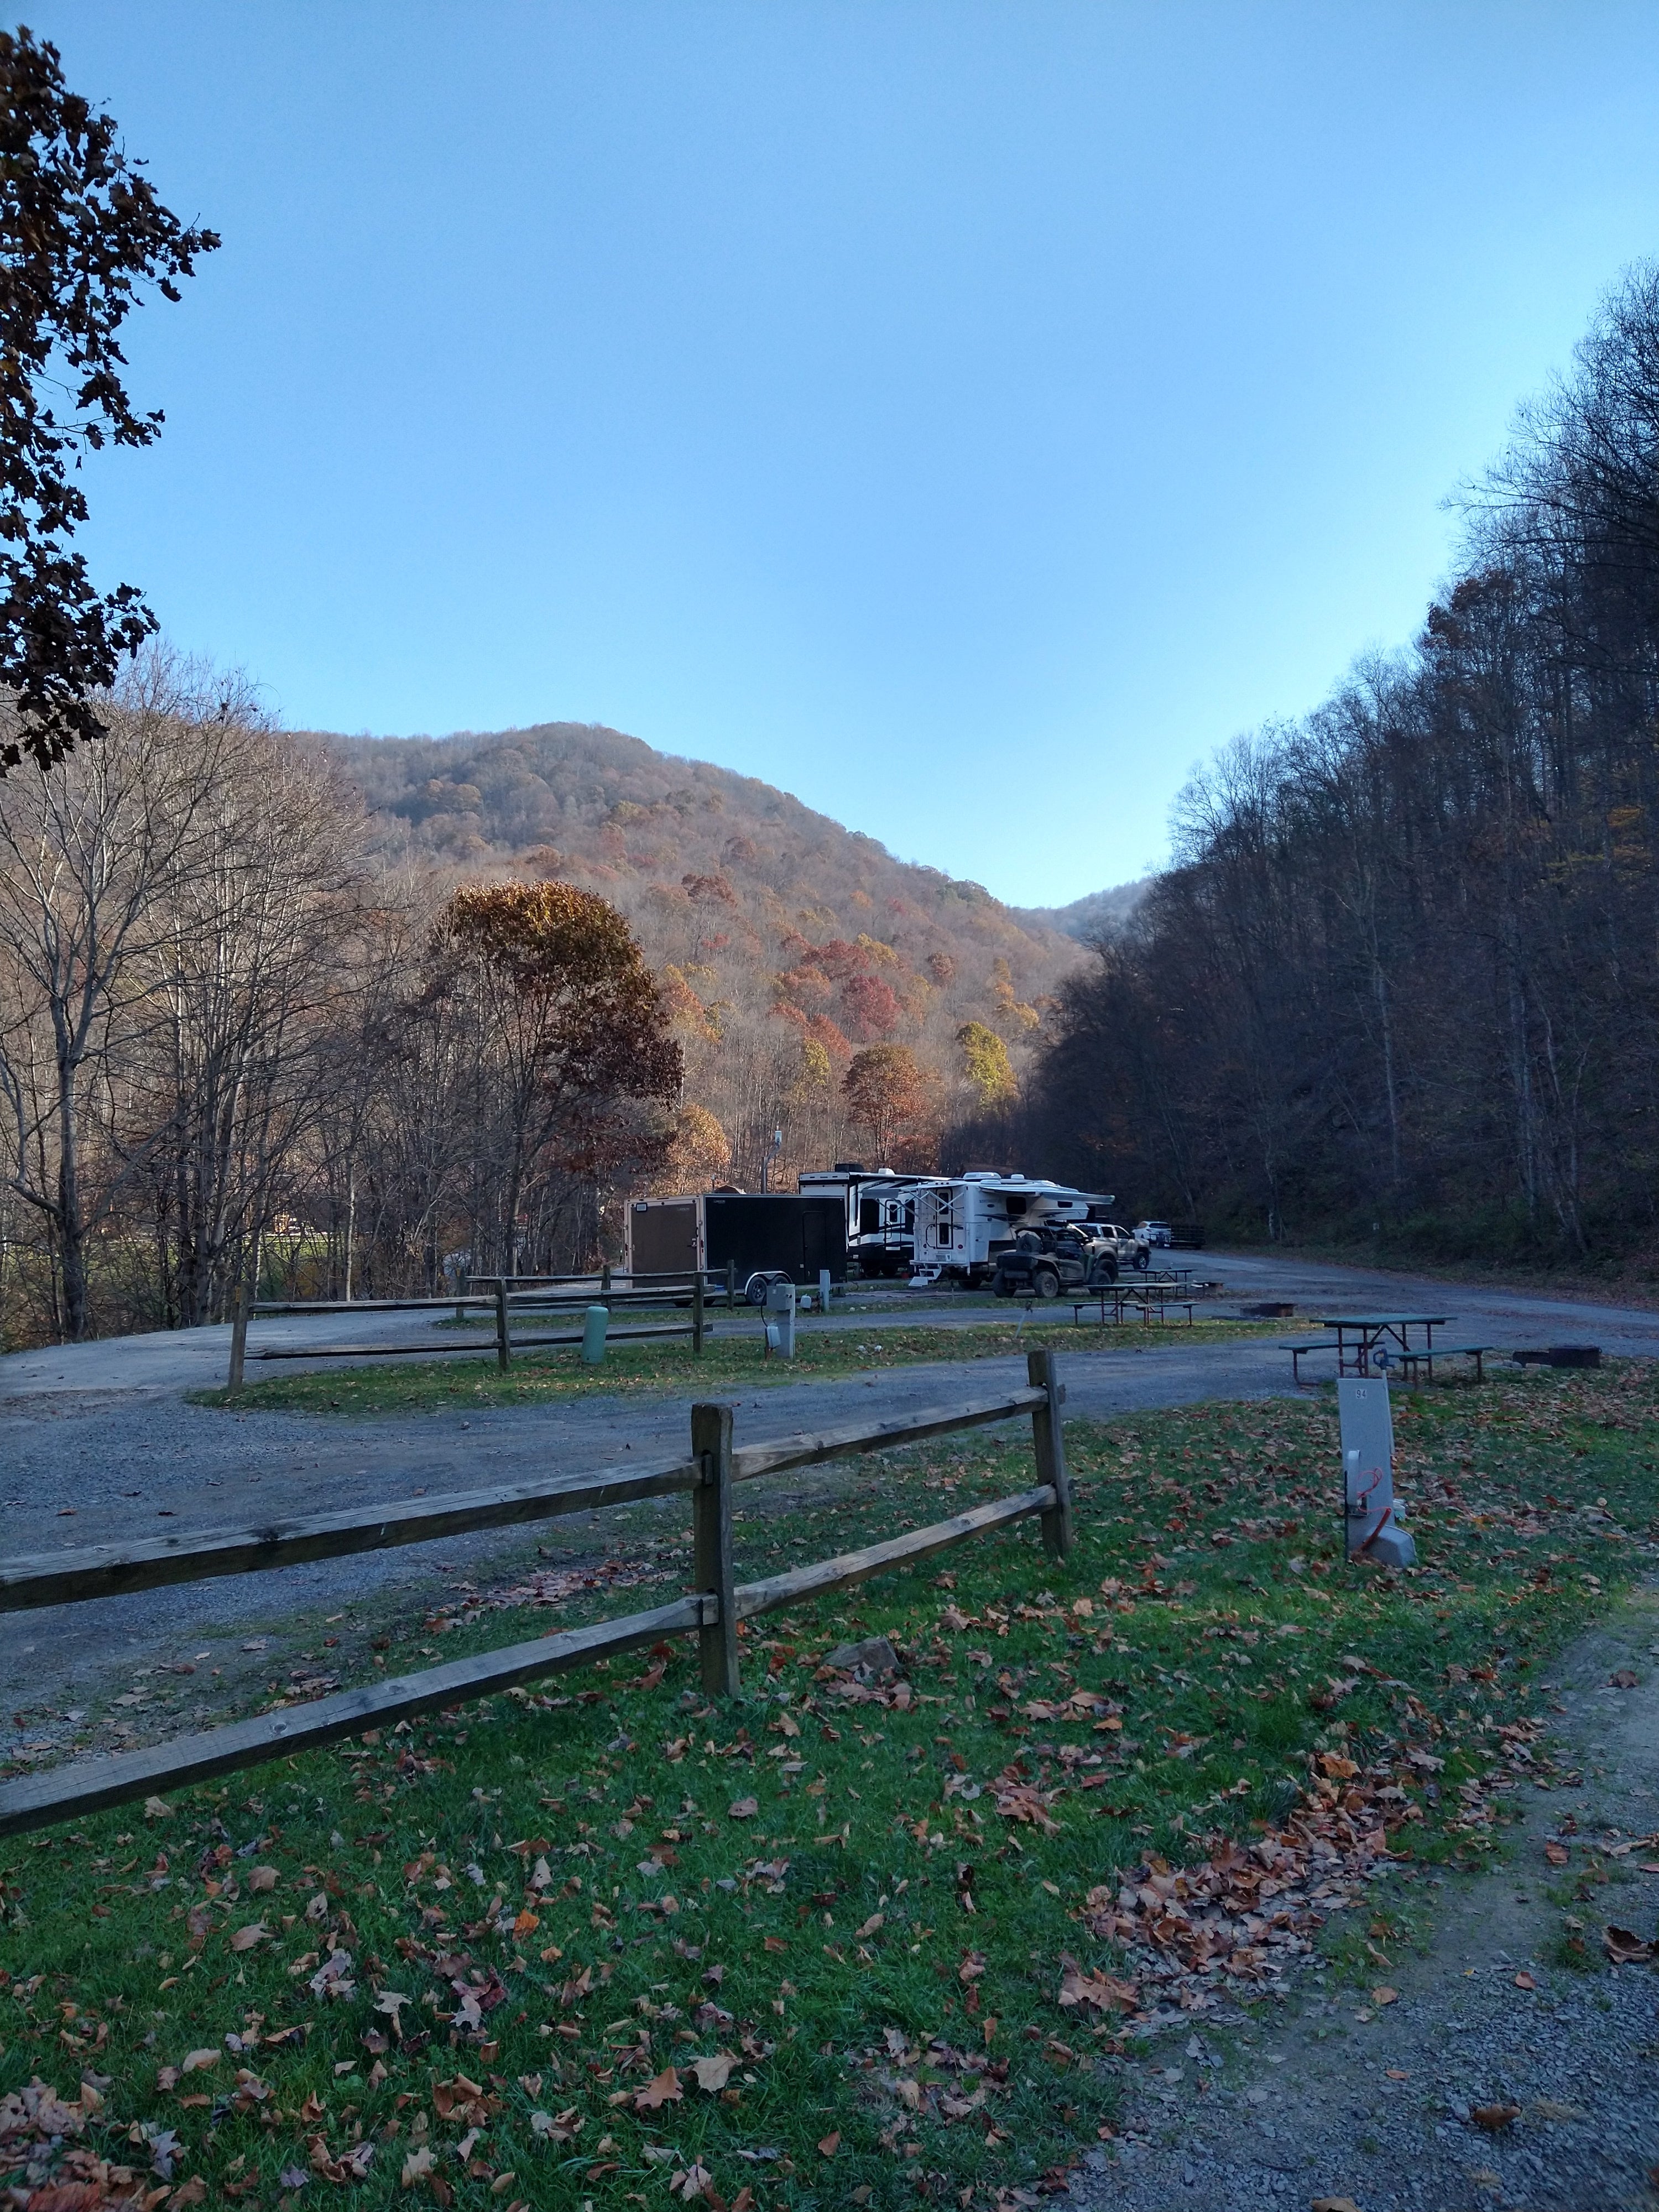 Camper submitted image from Ashland Resort - 3